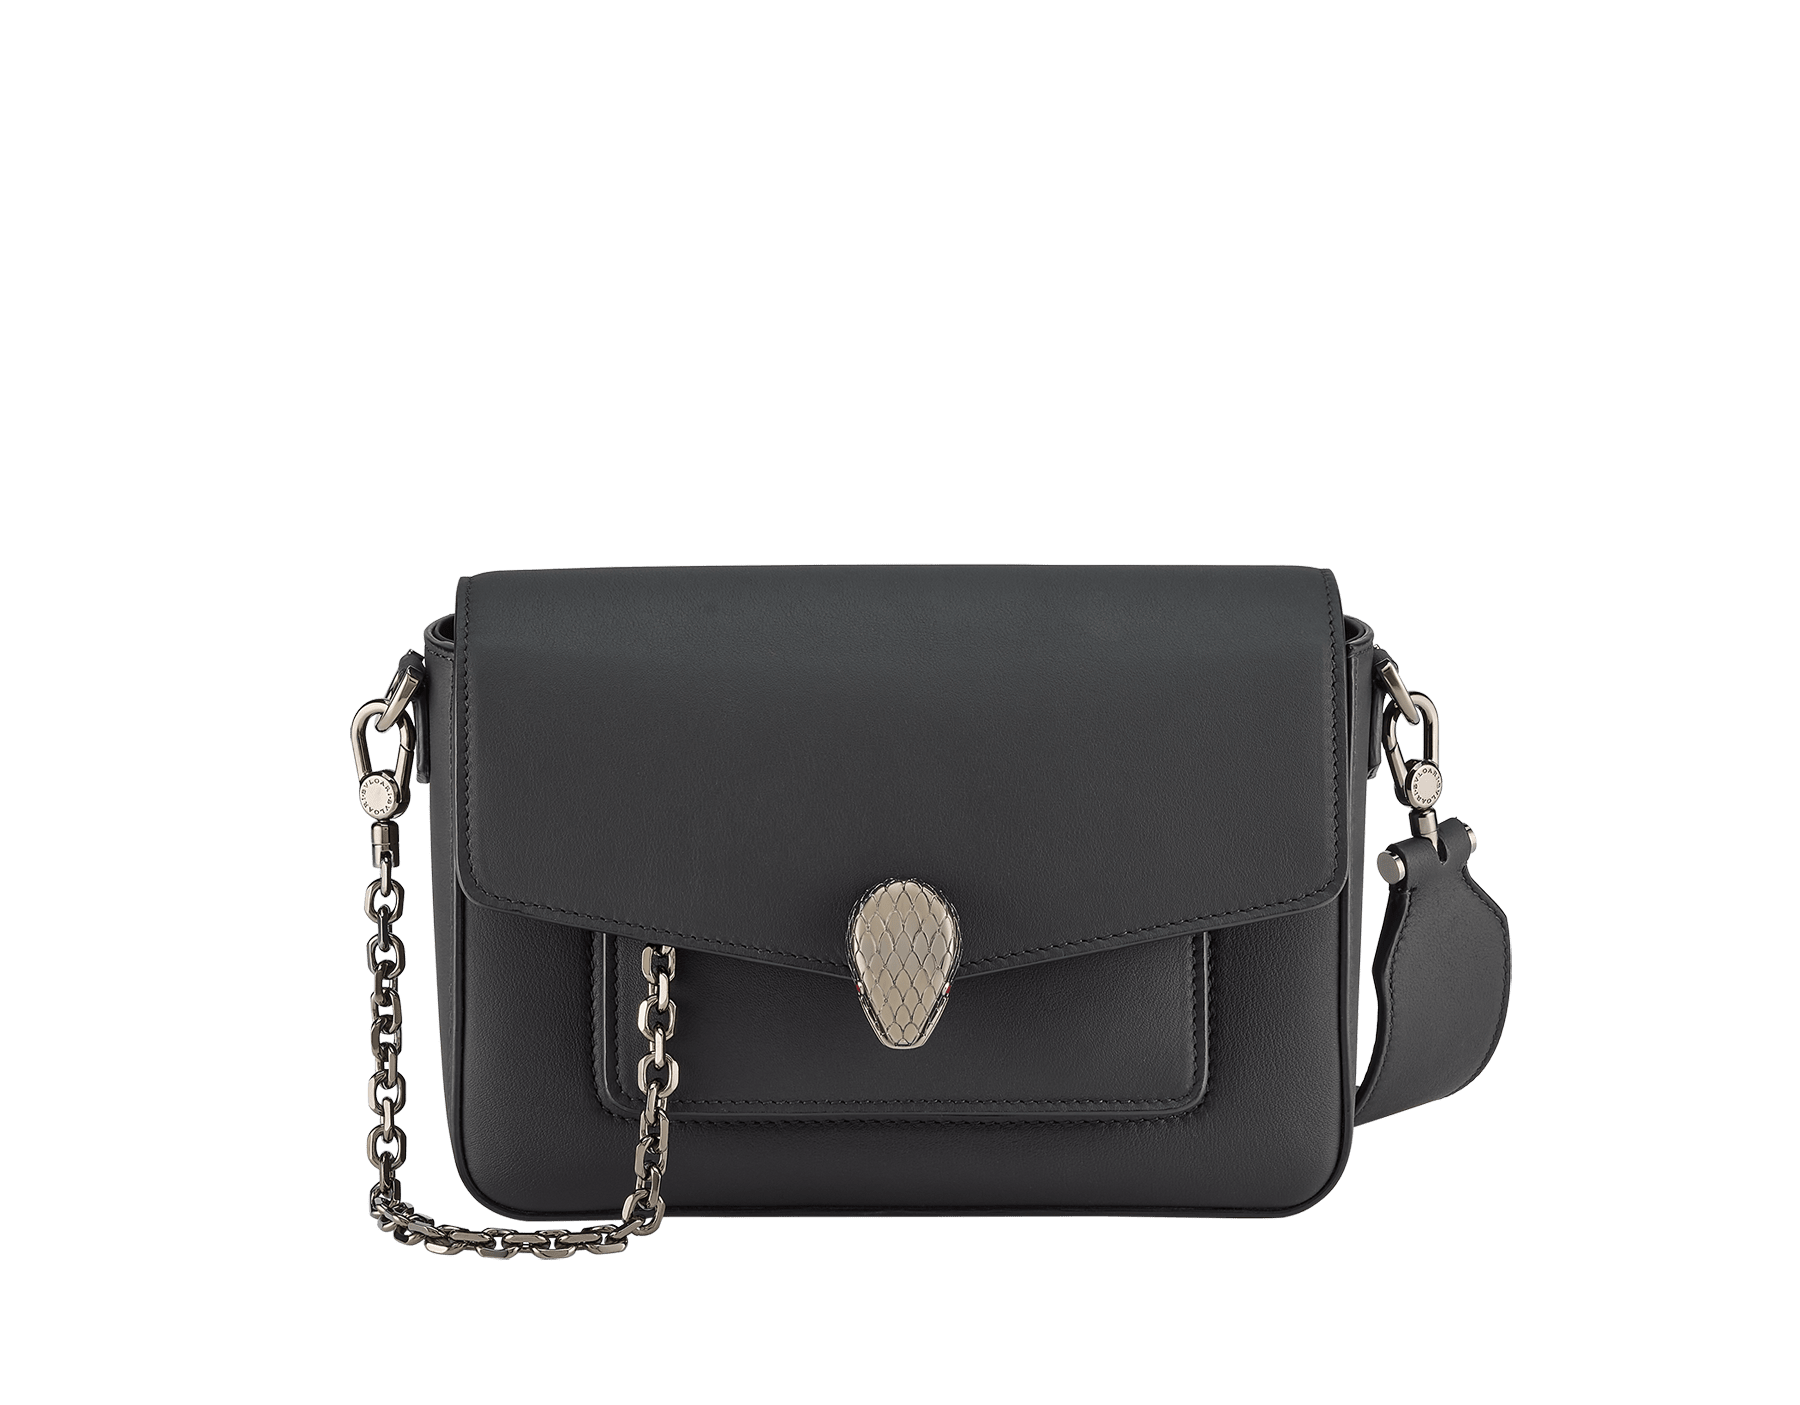 Serpenti Forever small unisex crossbody bag in matt black calf leather with black nappa leather lining and decorative chain. Captivating snakehead closure in dark ruthenium-plated brass embellished with red enamel eyes. 293022 image 1